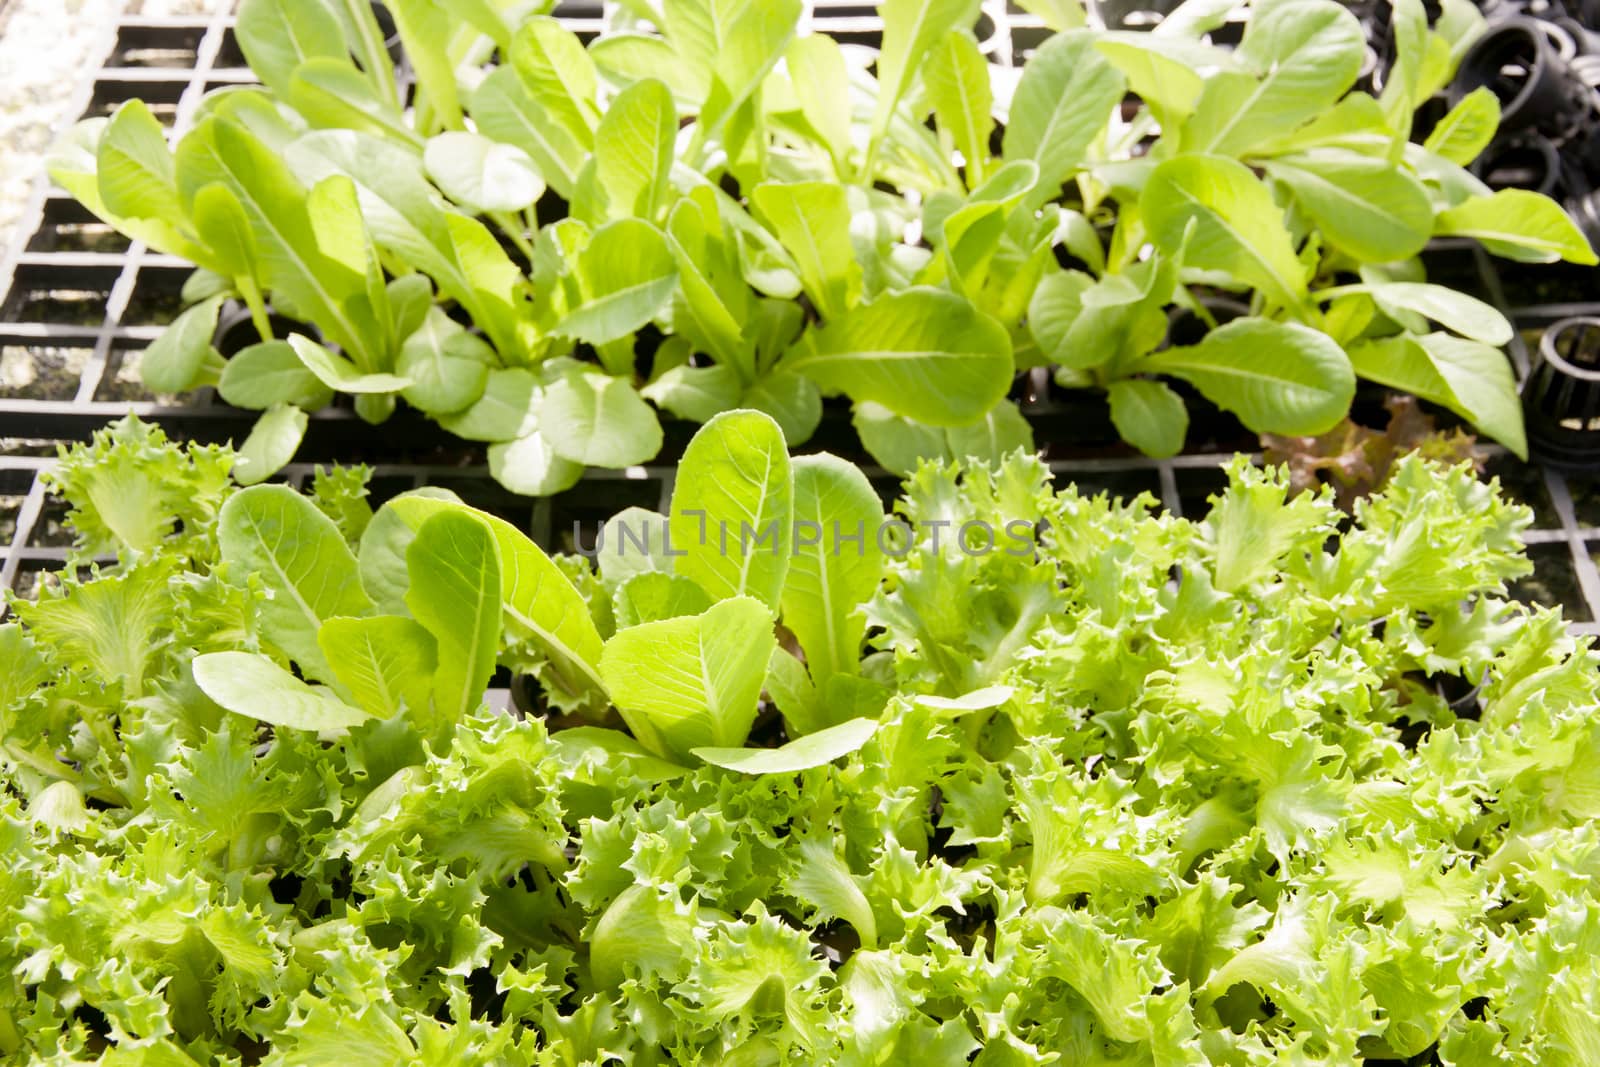 Organic hydroponic green cos romaine lettuce and Watercress (Nasturtium officinale) cultivation farm.